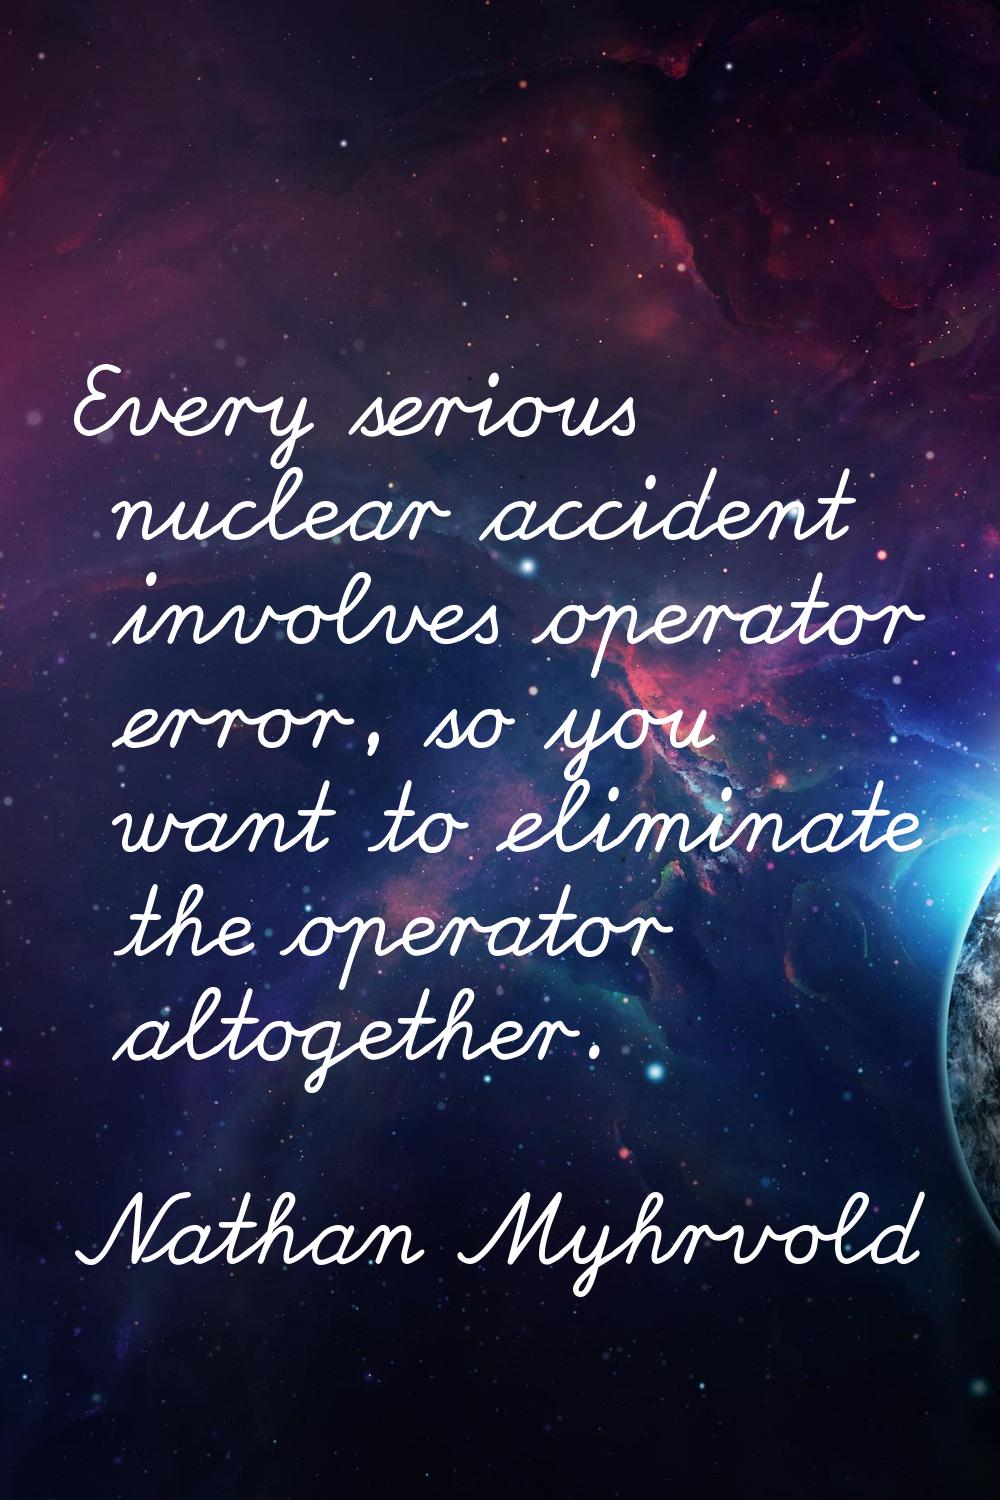 Every serious nuclear accident involves operator error, so you want to eliminate the operator altog